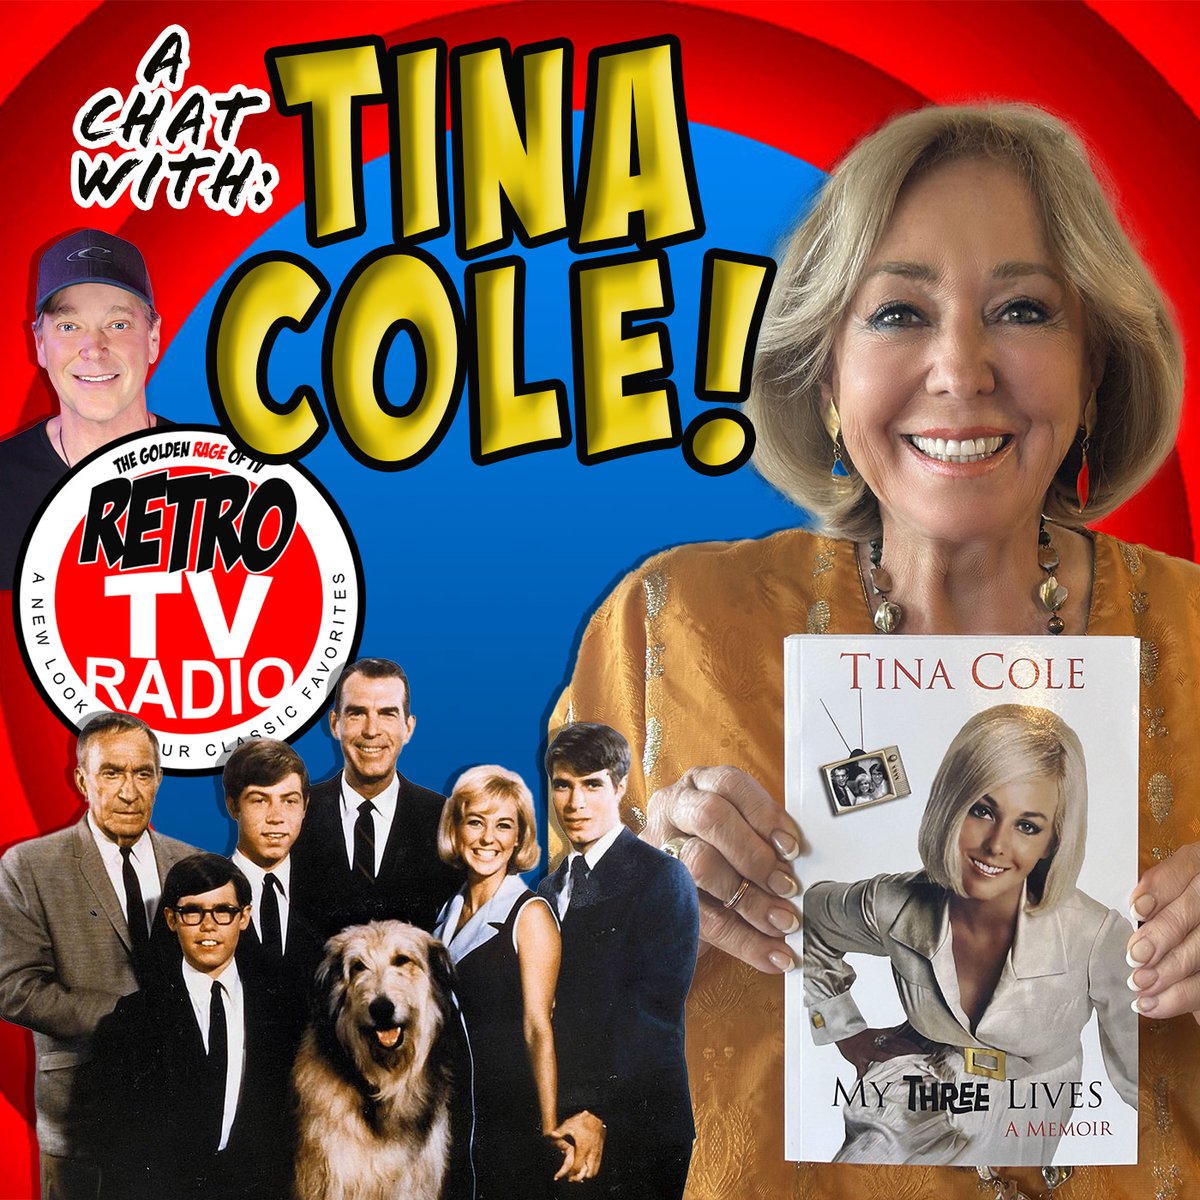 The lovely/legendary #TinaCole joins me on my #RetroTVRadiopodcast this Friday! She really knows how to give a great interview! Find Retro TV Radio available on most podcast platforms. #mythreesons #mythreelives #katiedouglas #thekingfamily #classictv #patmccormack